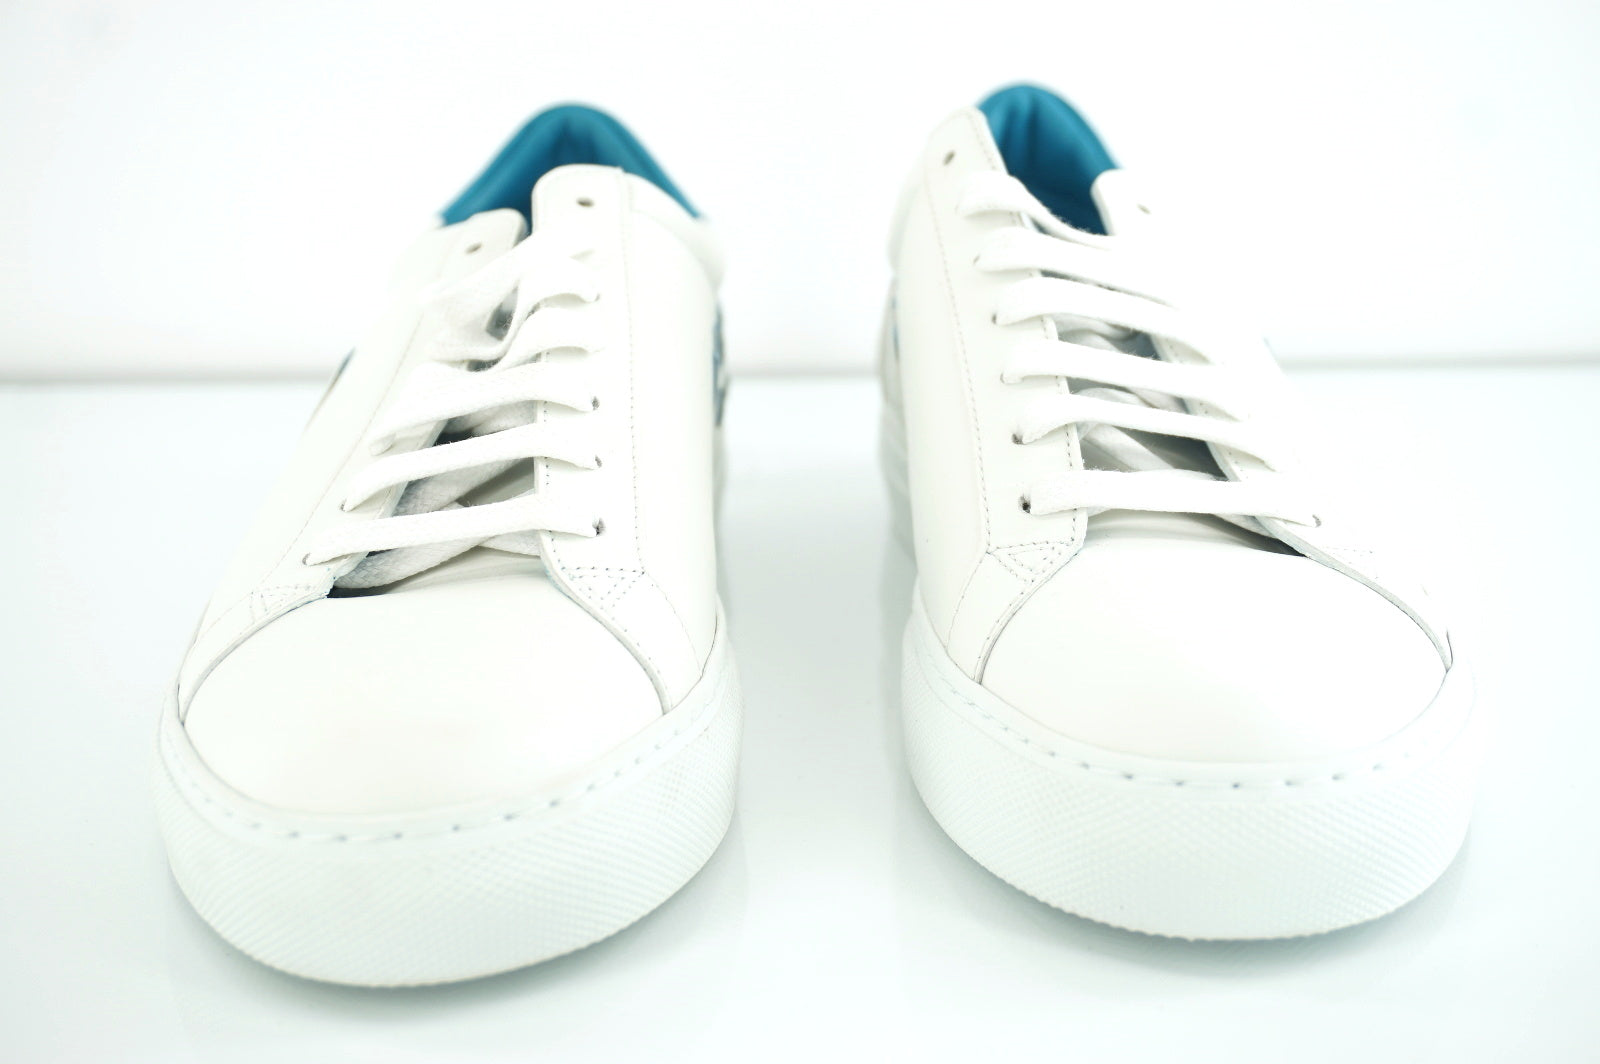 Givenchy White Leather Urban Street Low Top Sneaker SZ 40 10 New $750